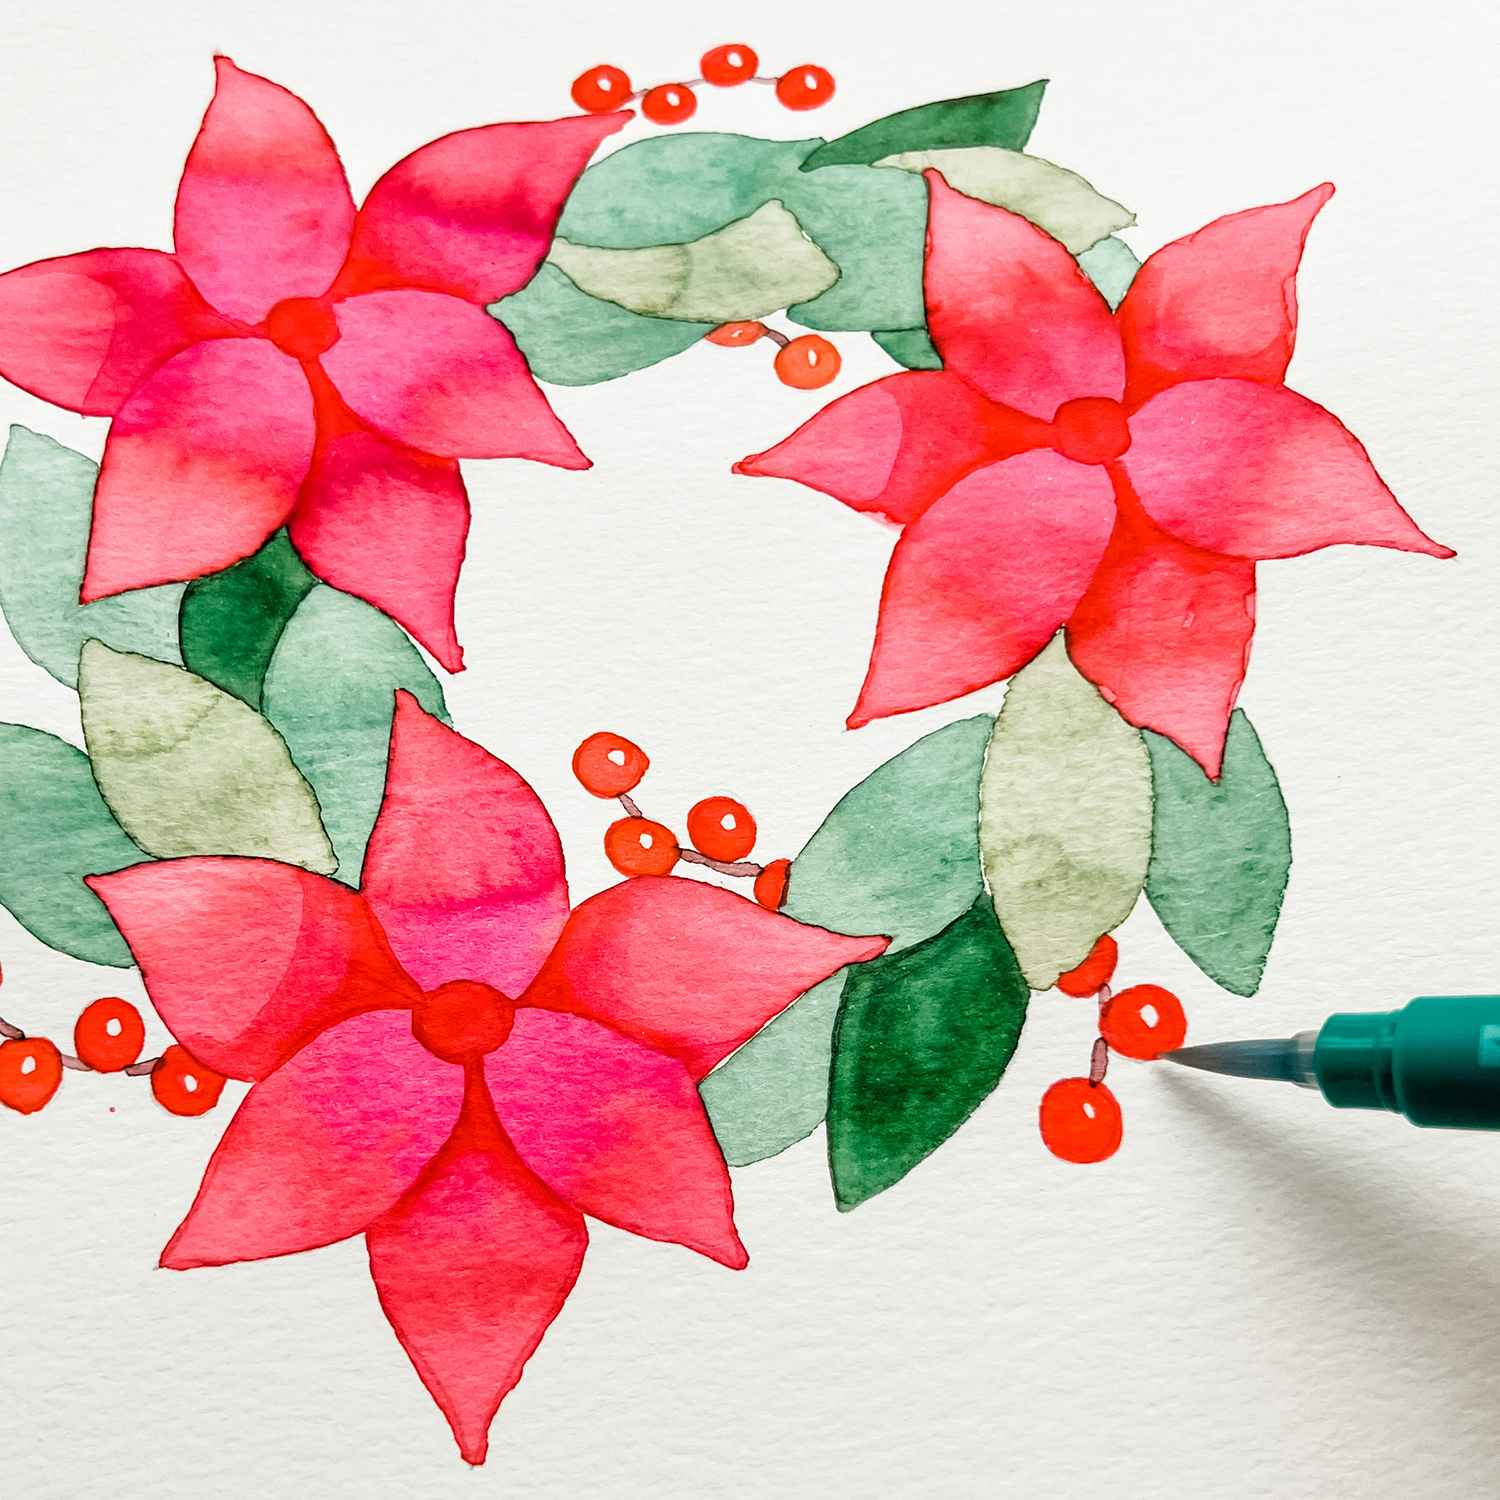 Paint a Wreath with Markers by Jessica Mack on behalf of Tombow